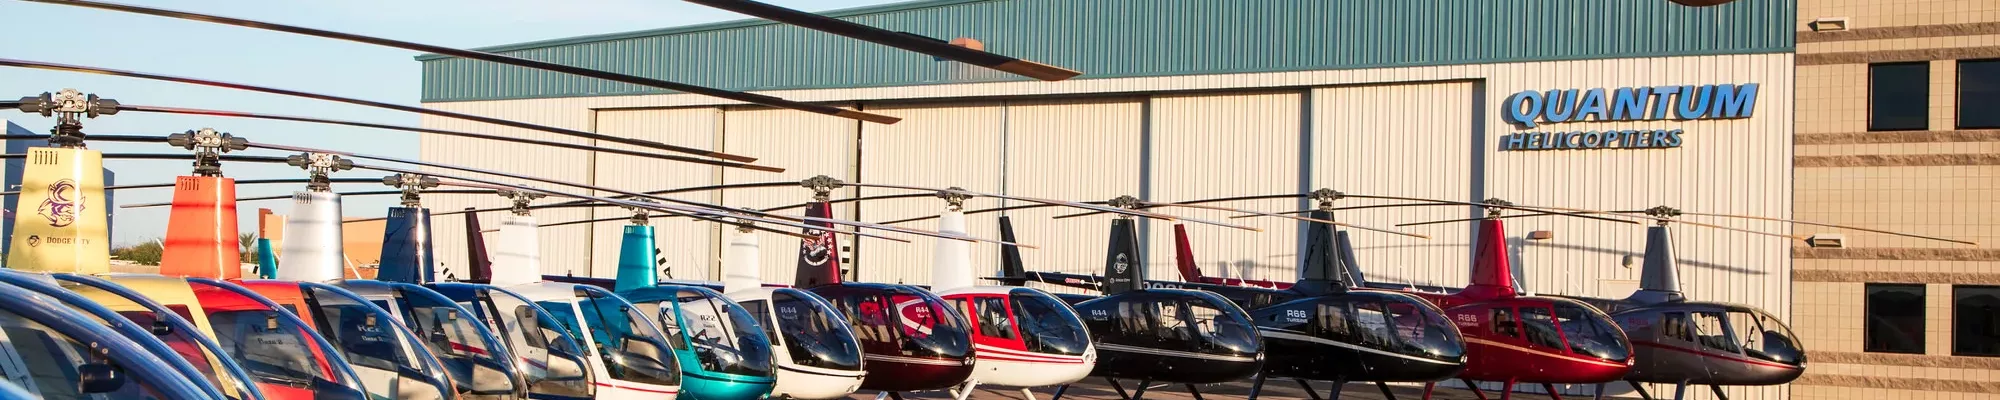 fleet of helicopters at Quantum Helicopters